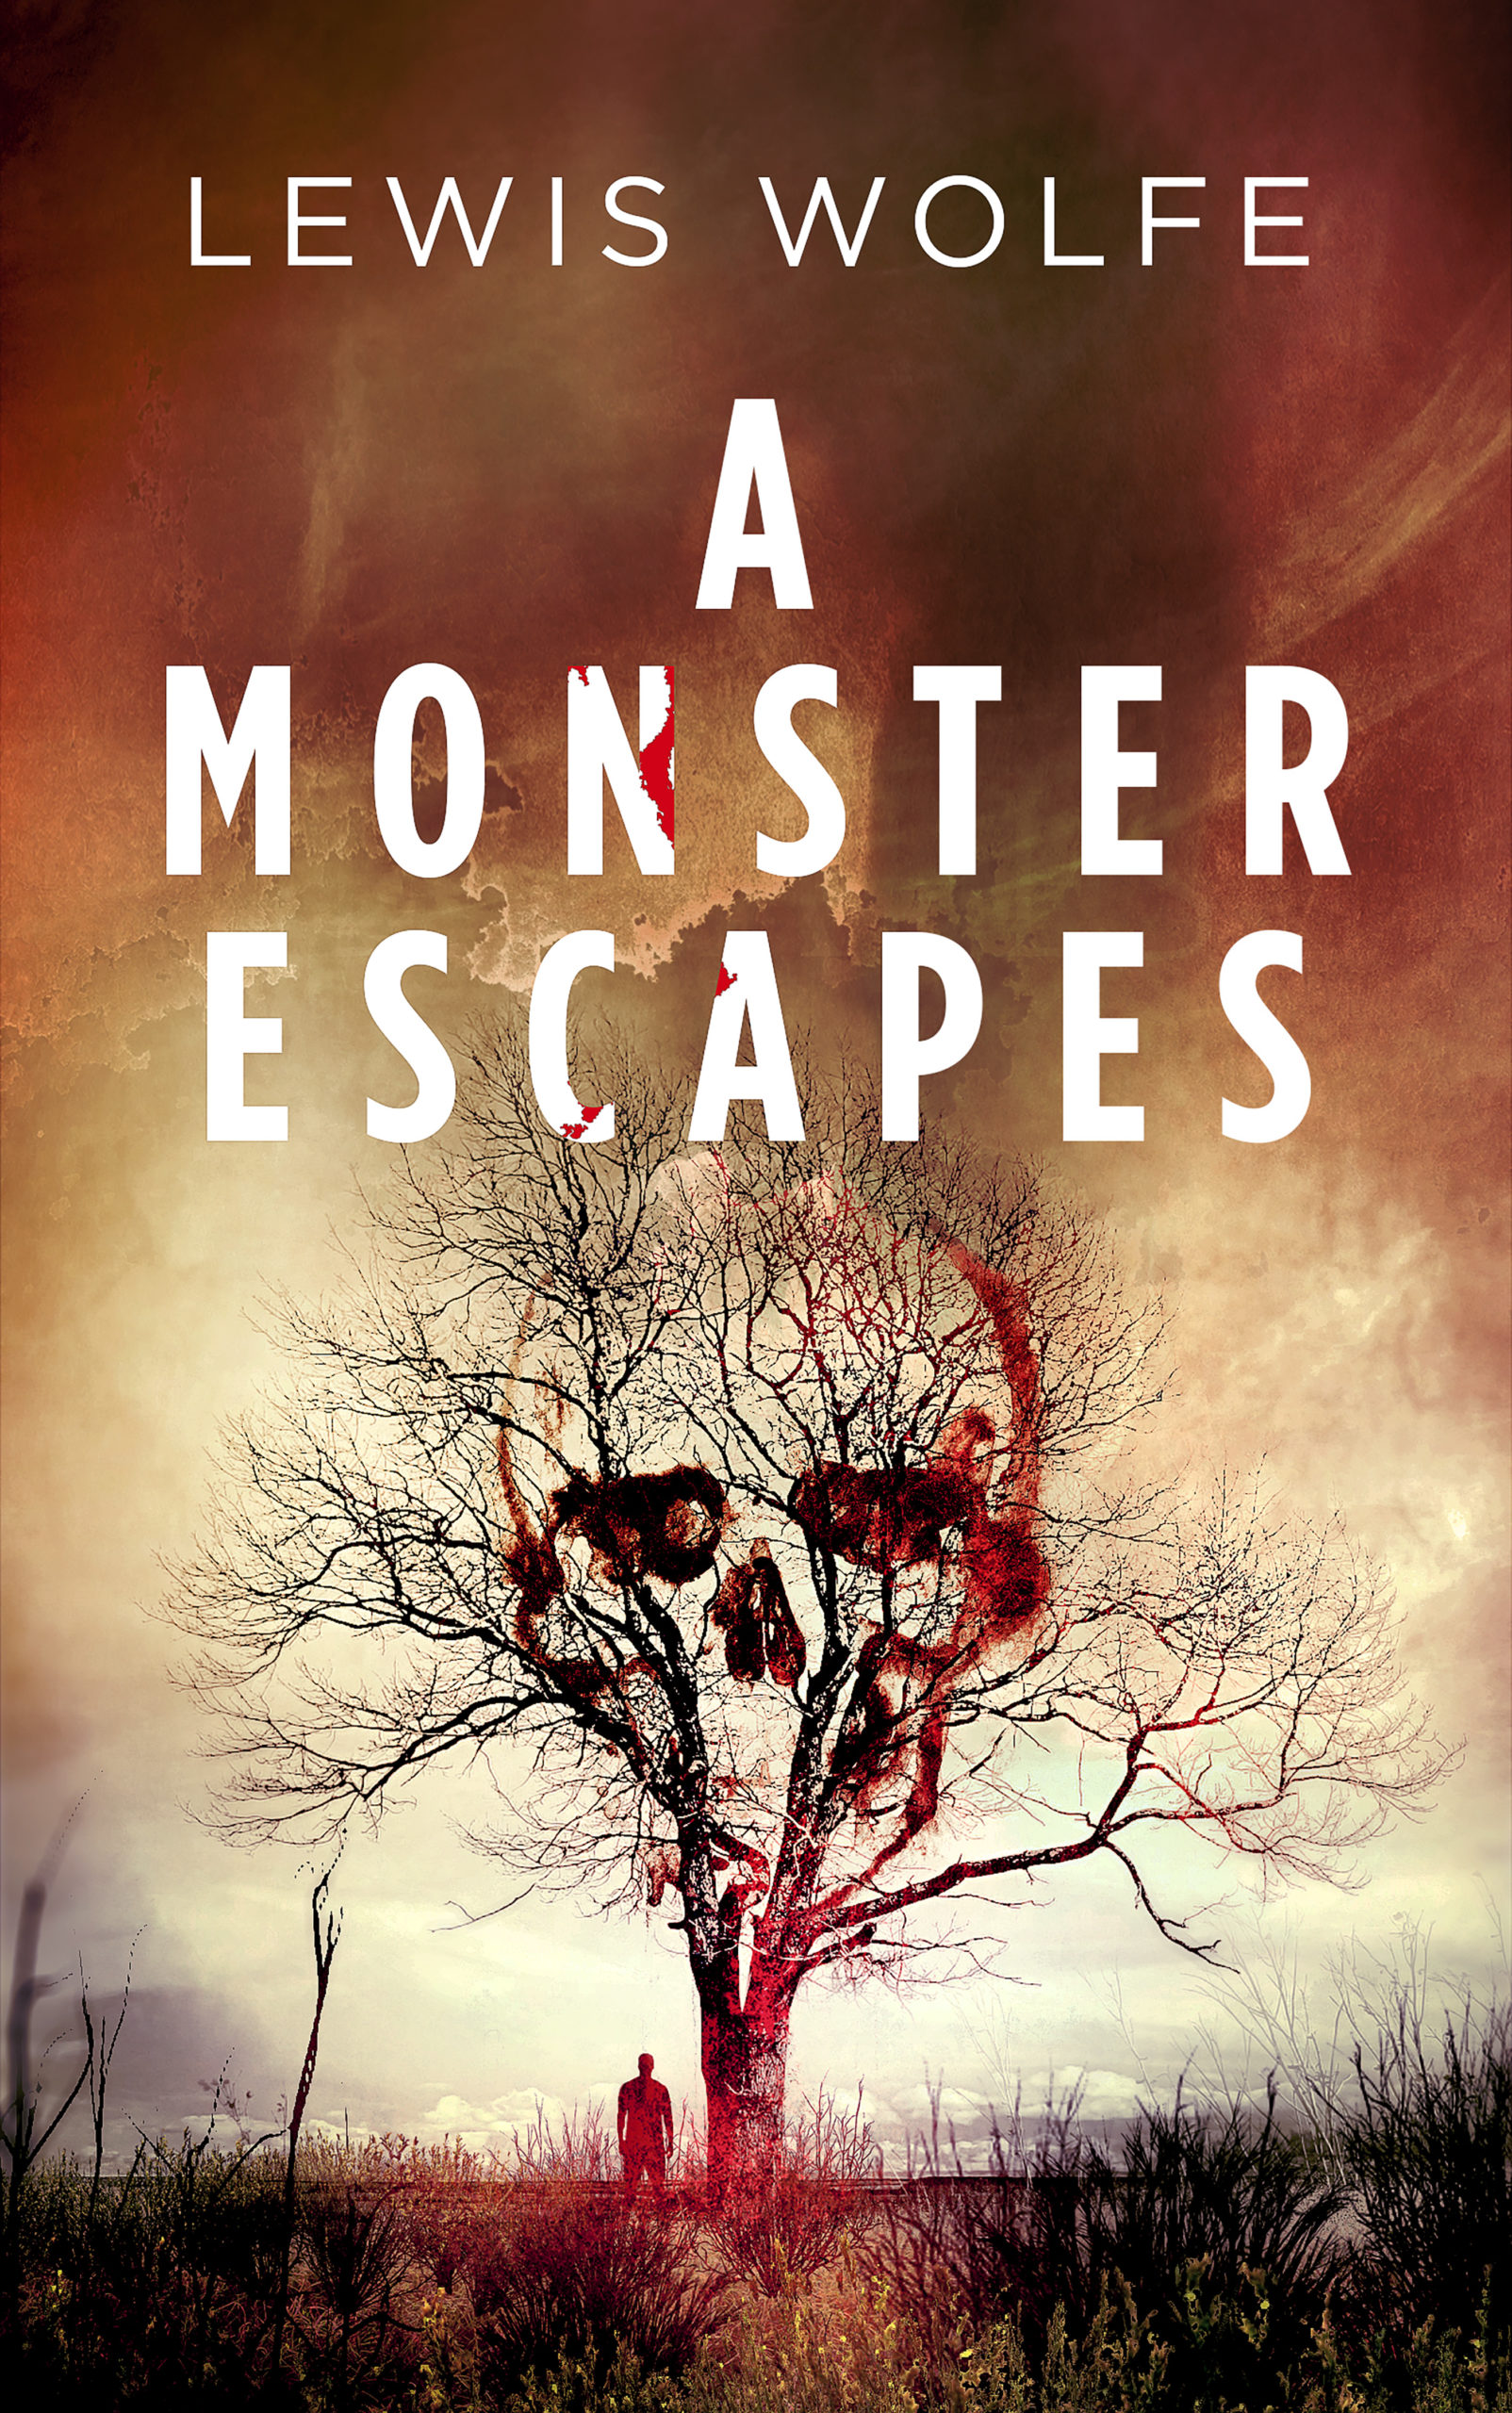 A Monster Escapes by Lewis Wolfe